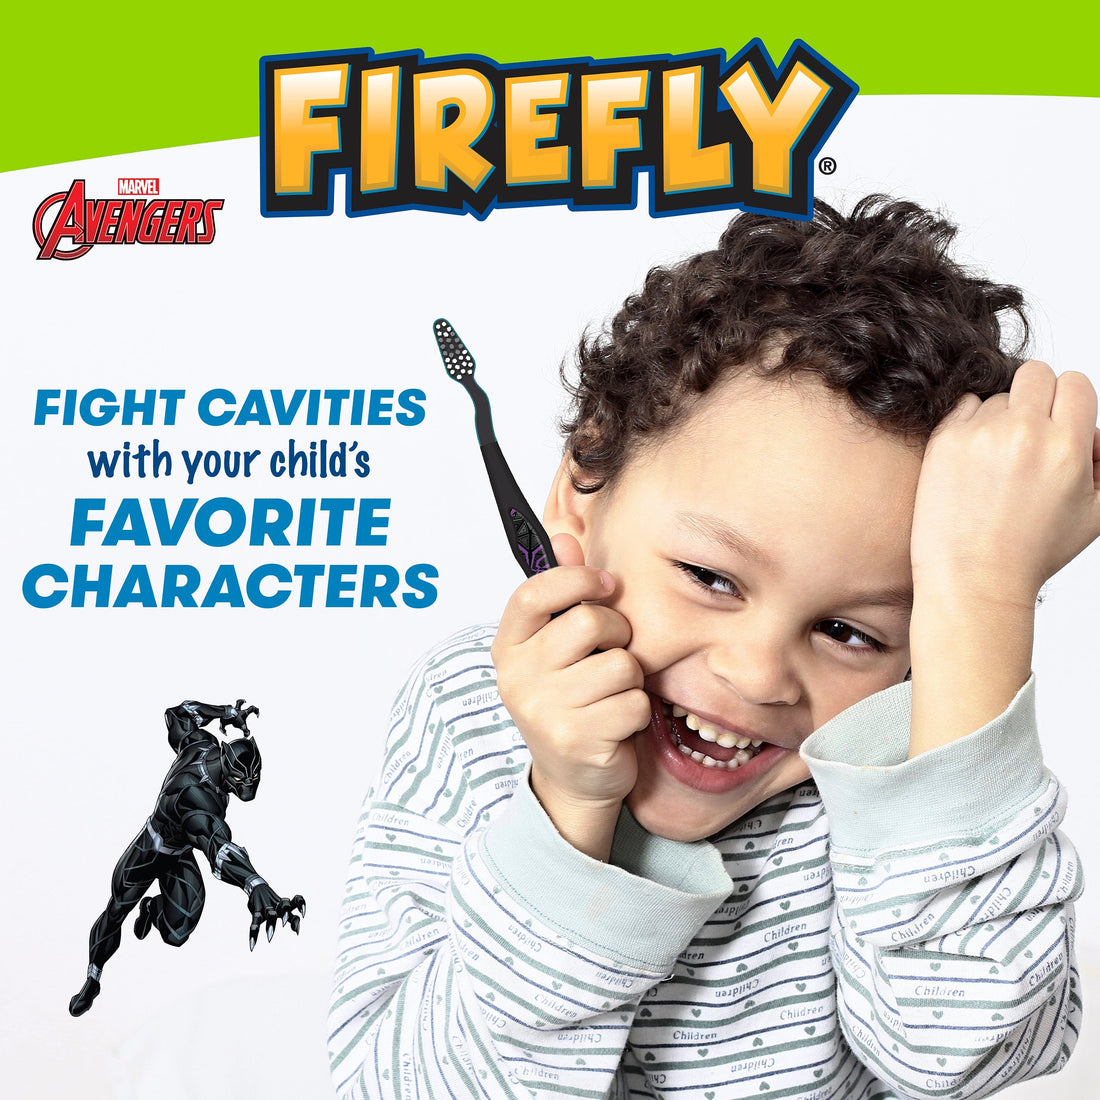 Avengers Black Panther Character. Child holding Toothbrush. Fight cavities with your child&